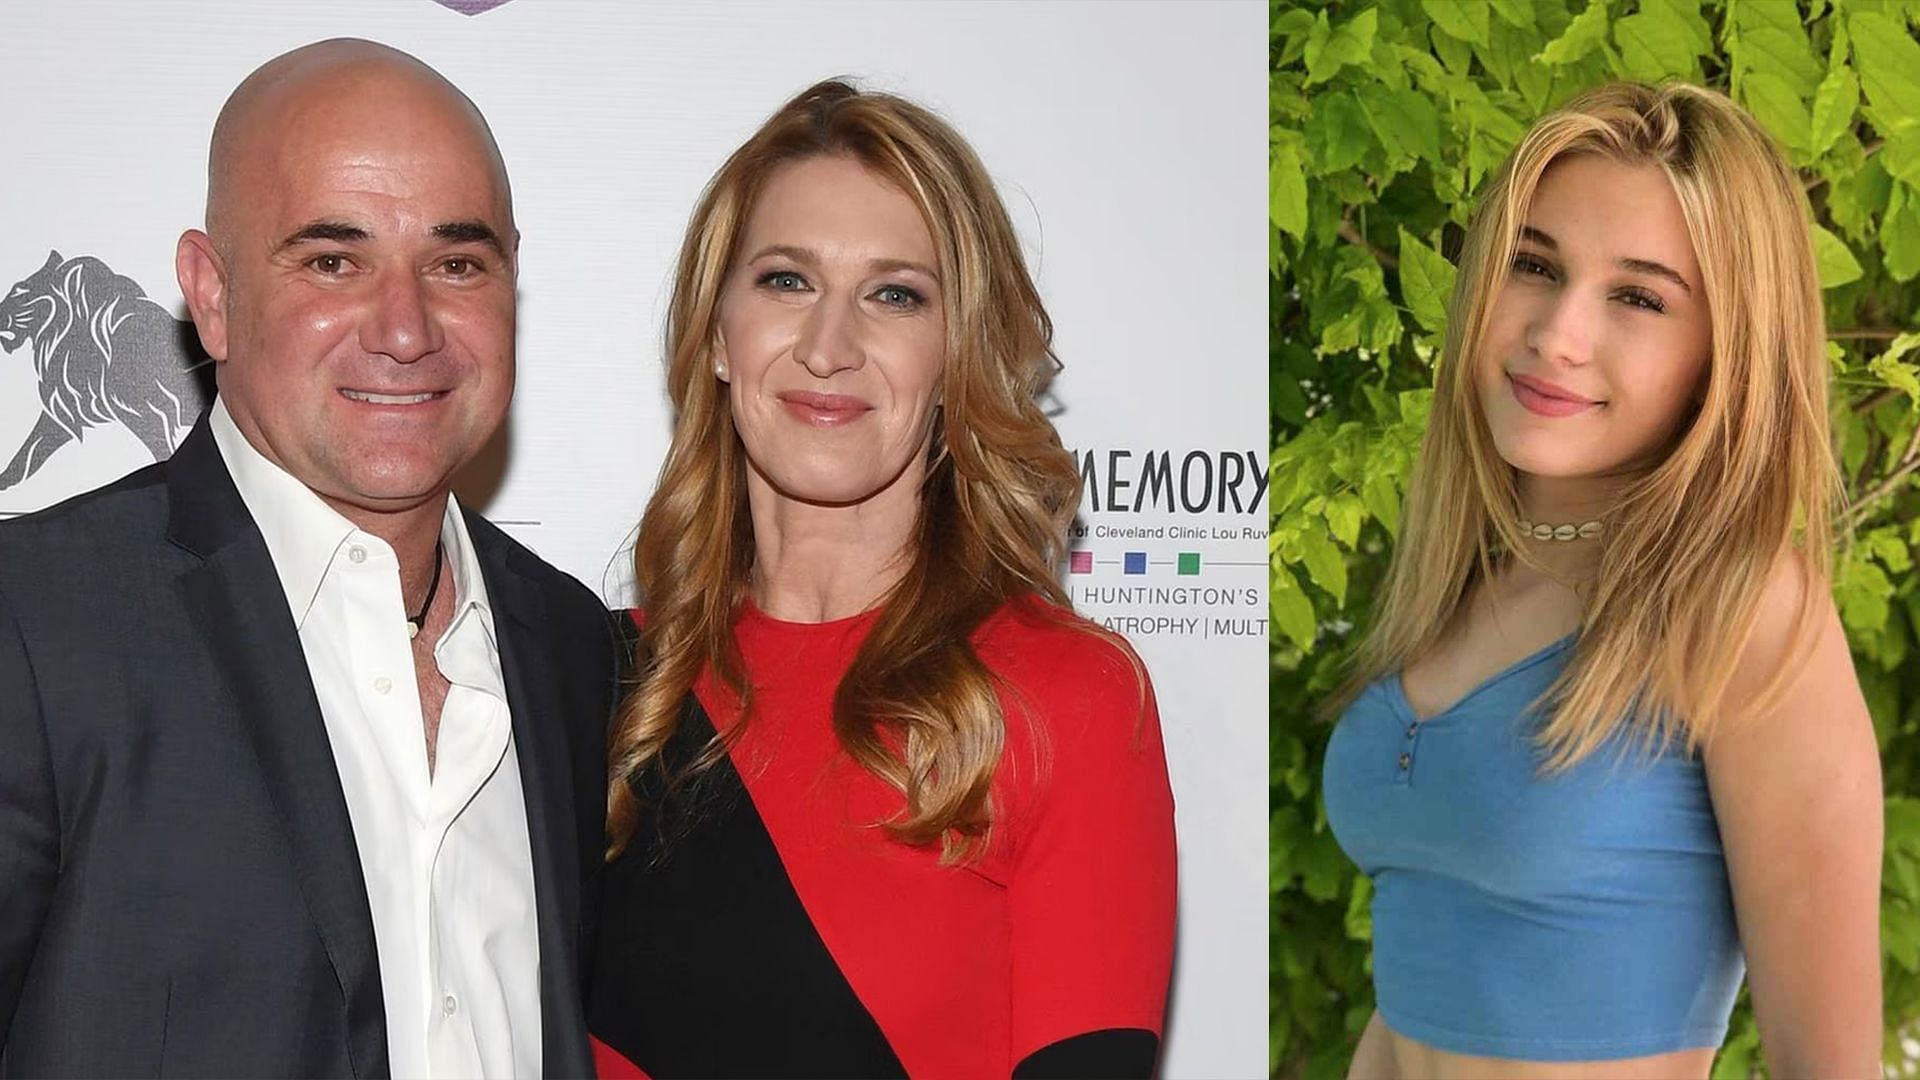 Andre Agassi, Steffi Graf and their daughter Jaz